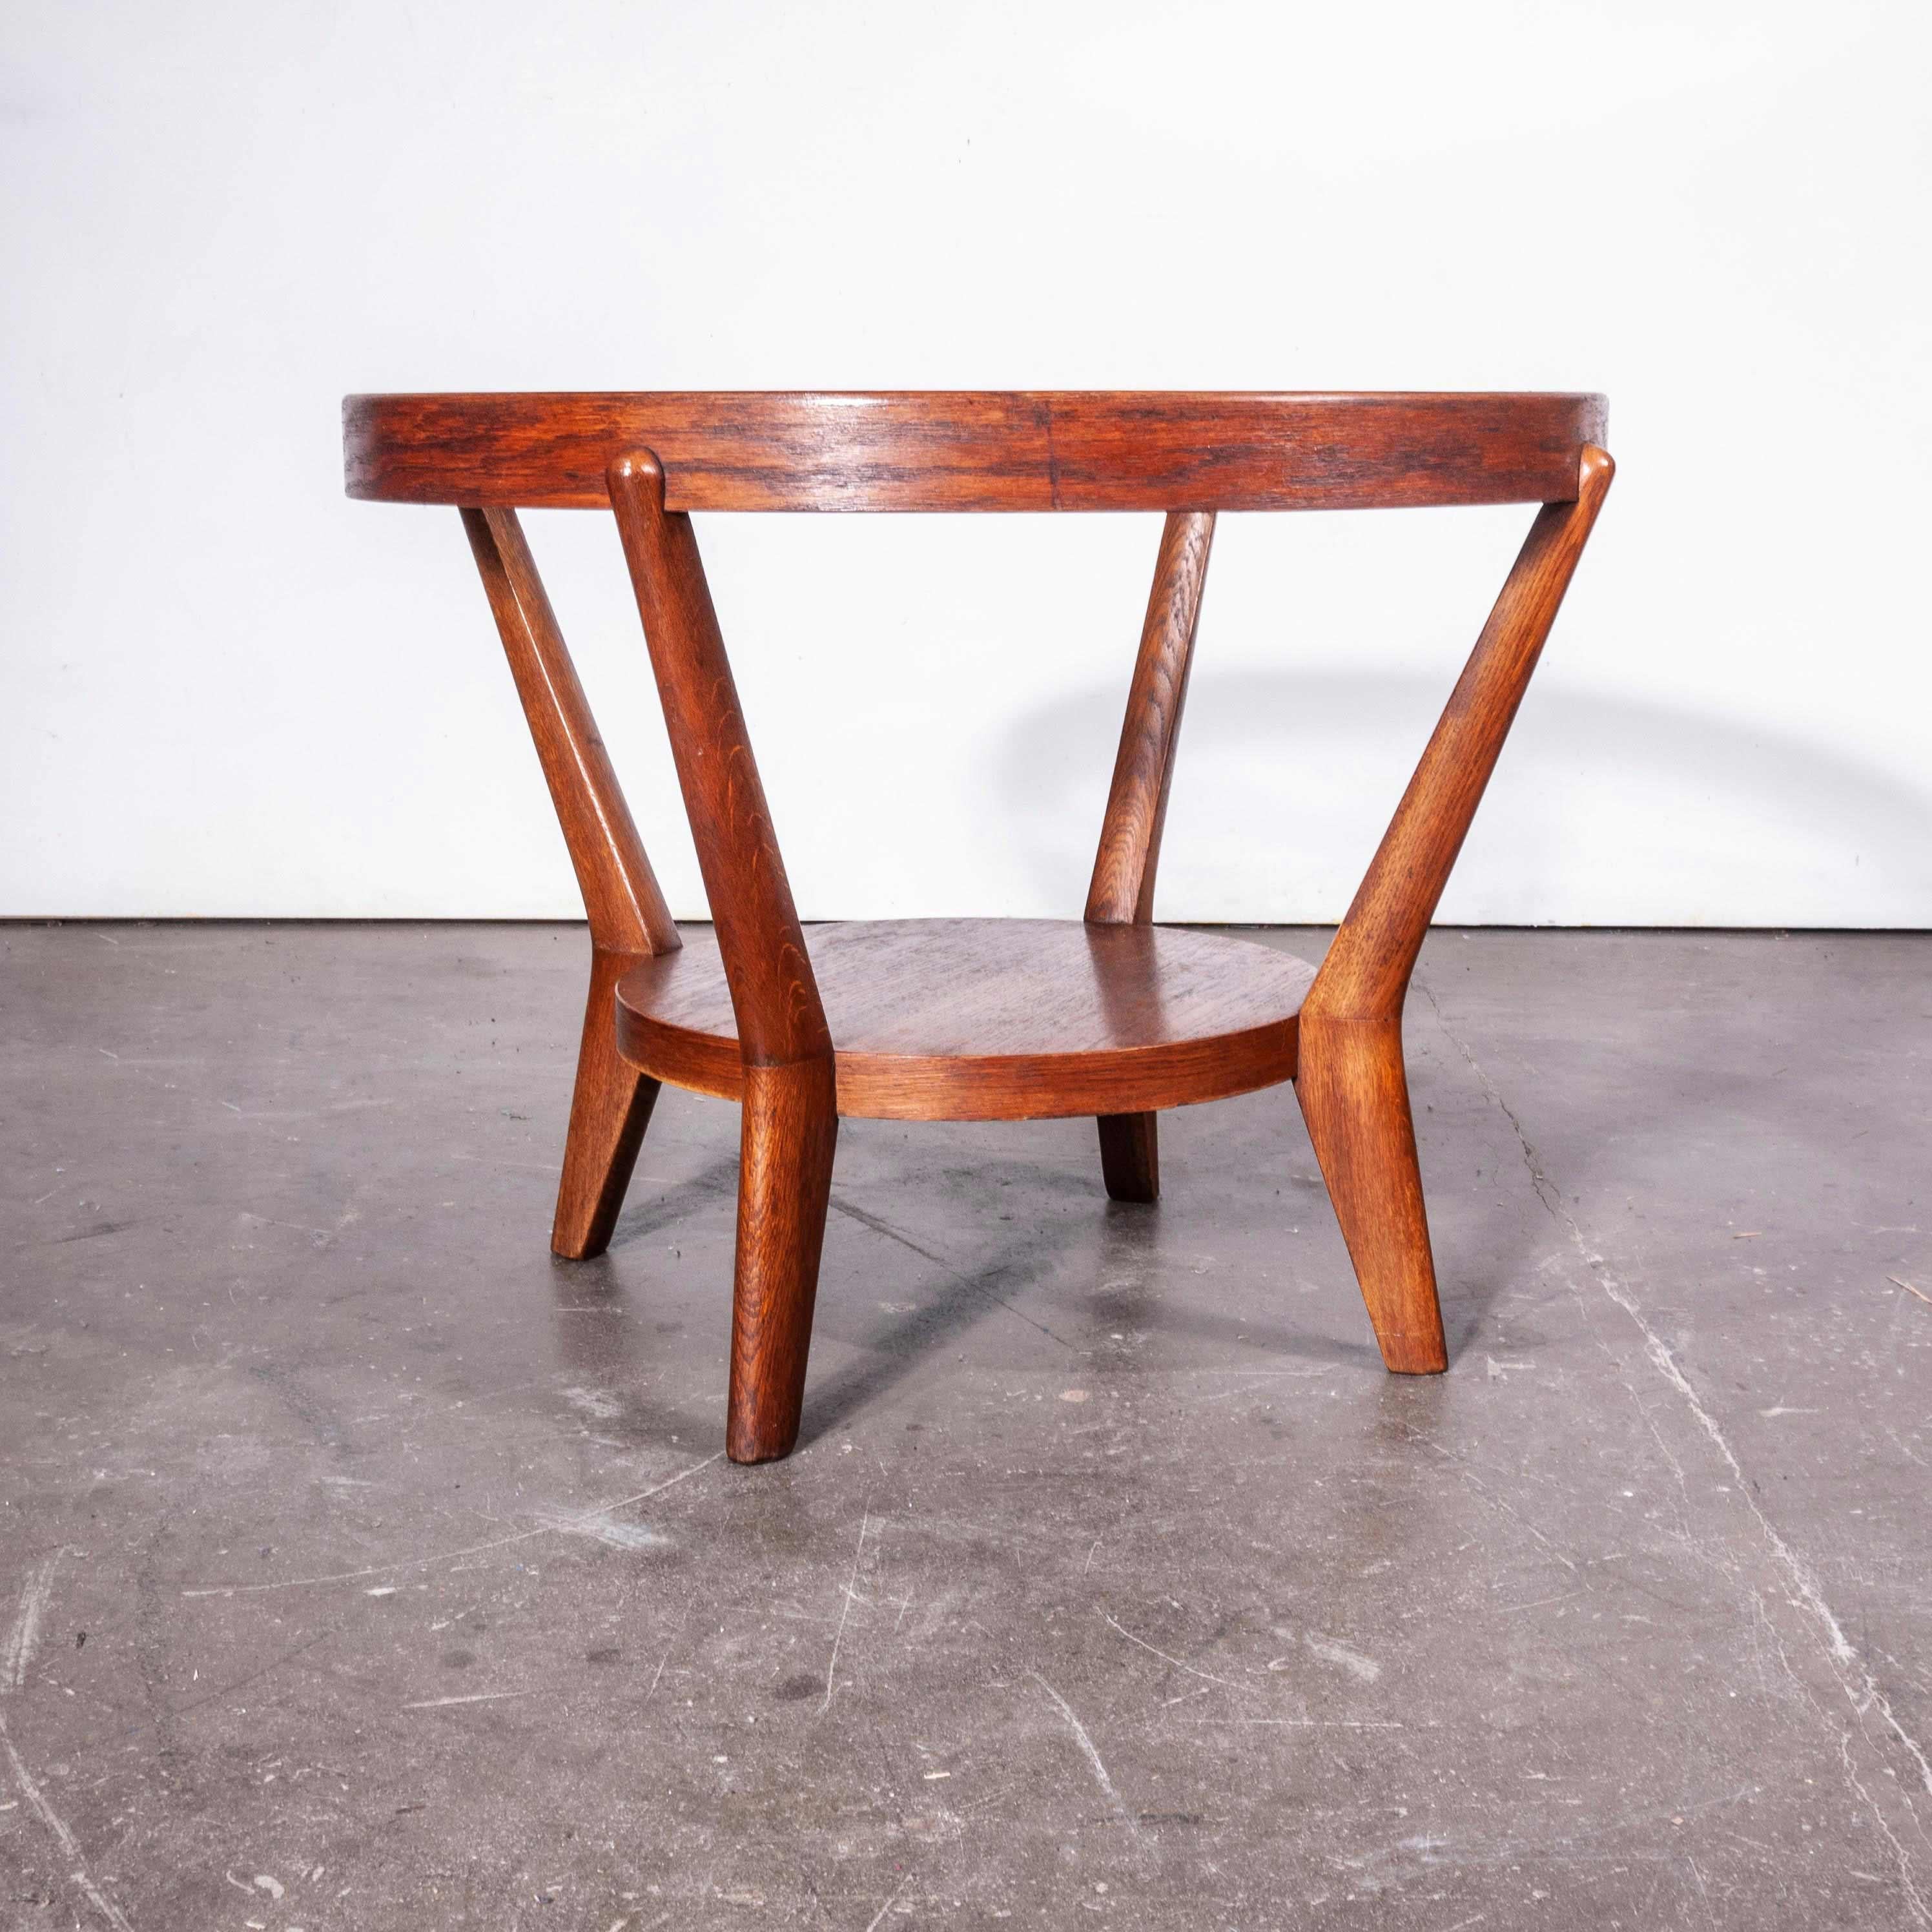 1950s round occasional table by Kozelka and Kropacek for Interieur Praha – mid oak
1950s round occasional table by Kozelka and Kropacek for Interieur Praha. A beautifully proportioned table made from European oak retaining its original glass top.